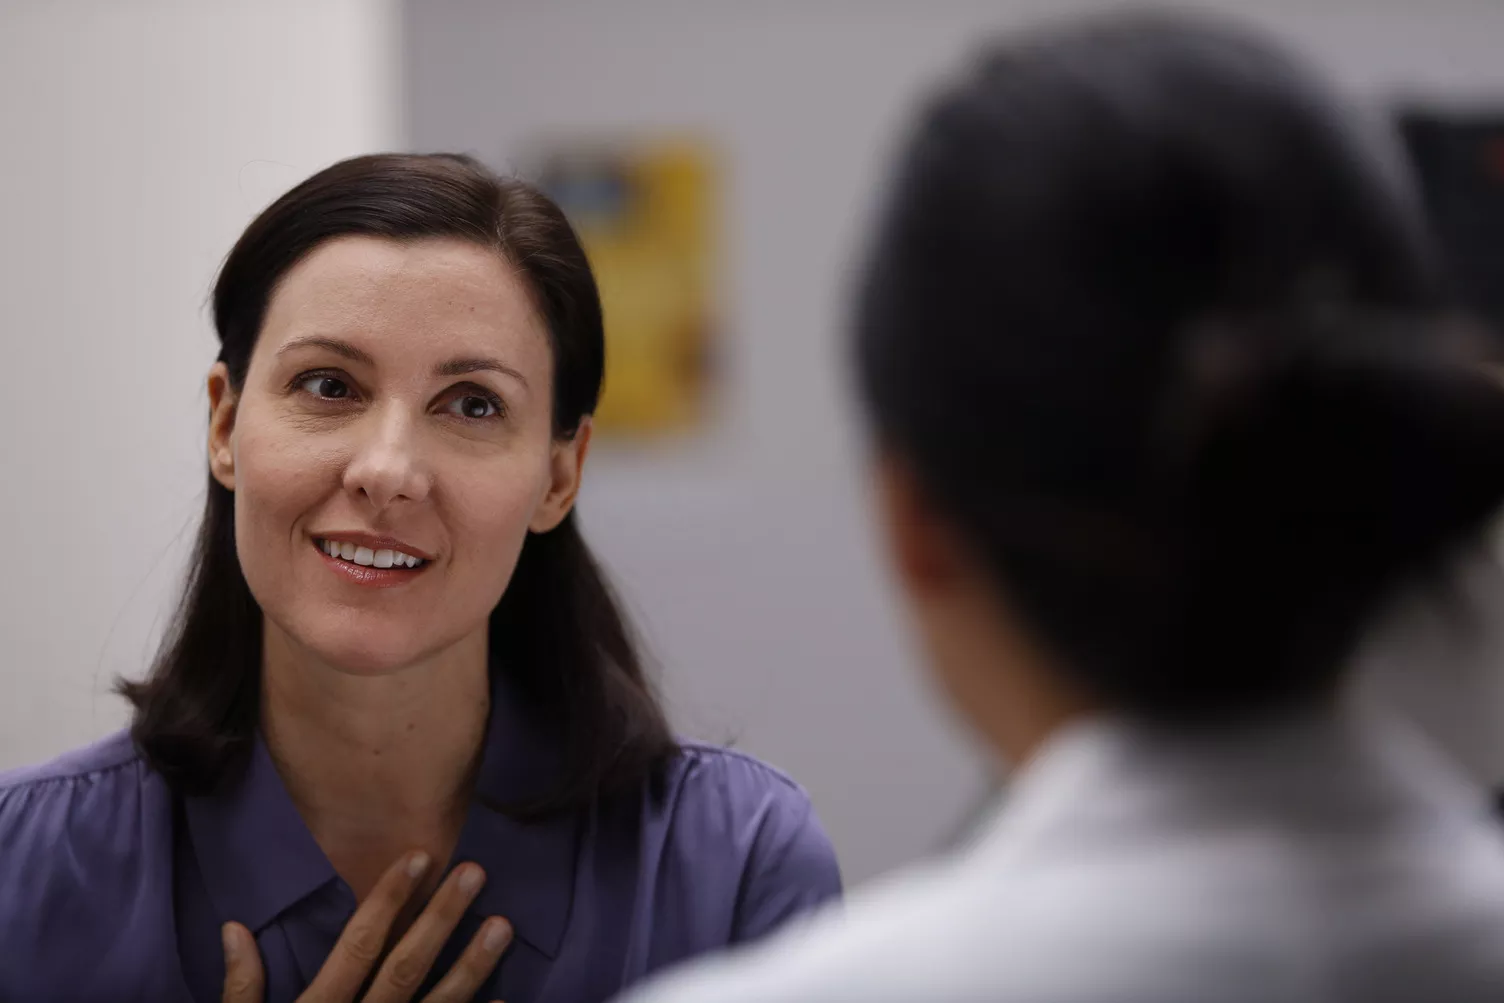 Woman talking to healthcare professional